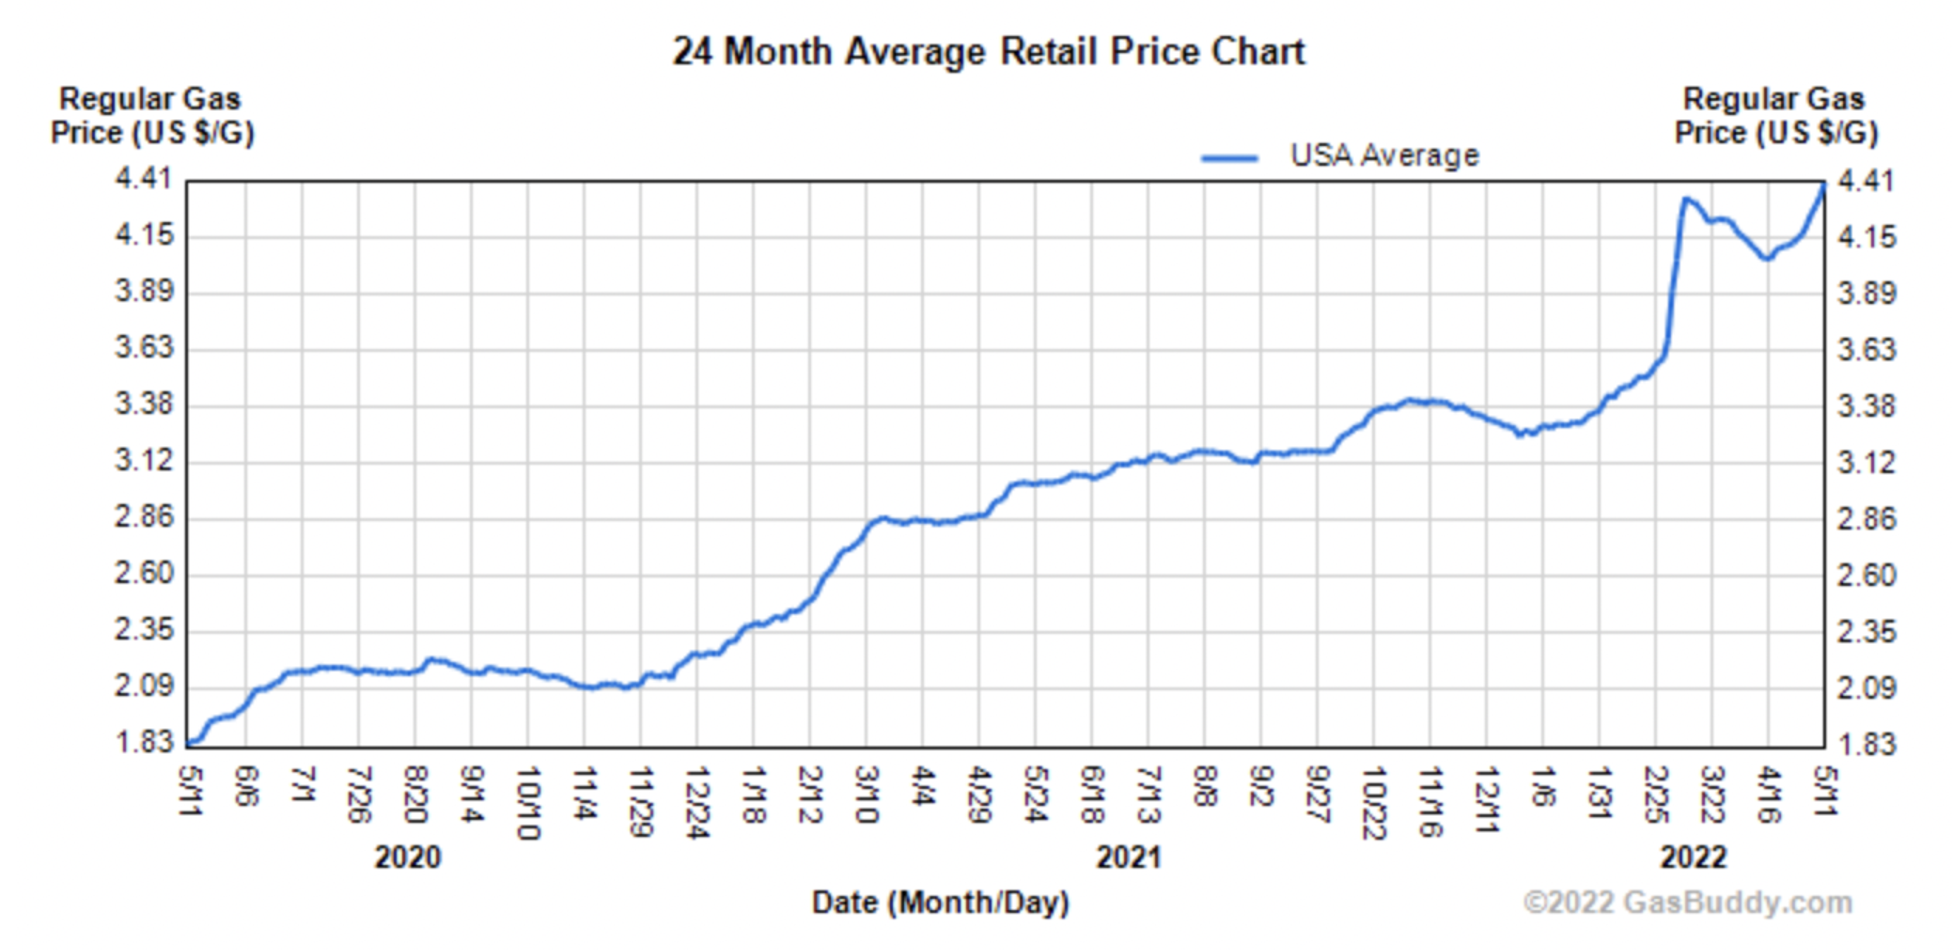 gas prices over time line chart may 2020 to may 2022